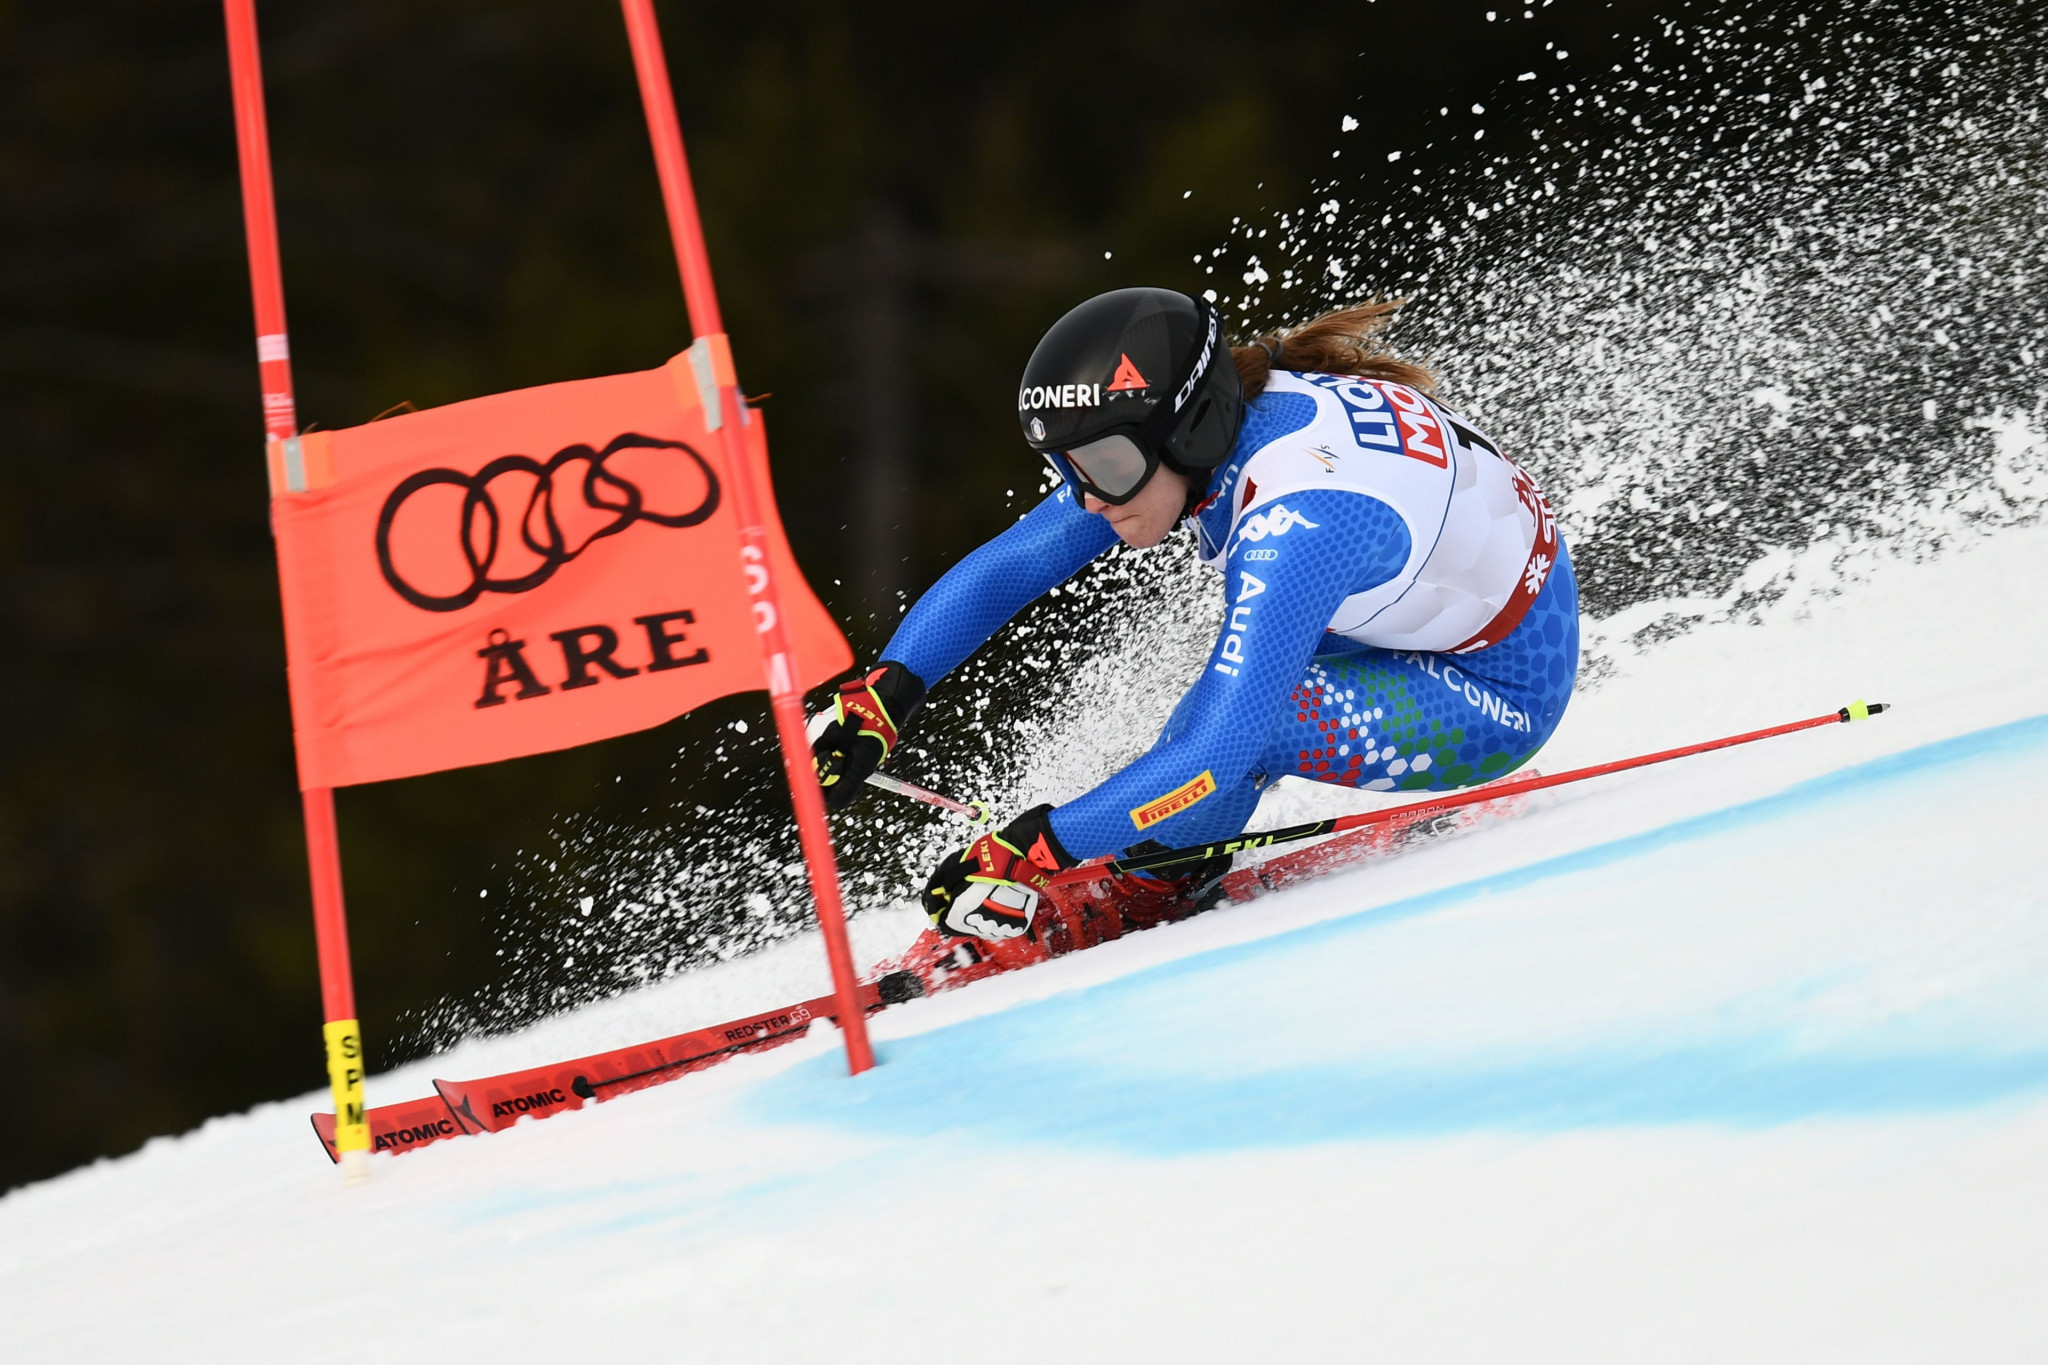 Amid difficult conditions the Olympic downhill champion Sofia Goggia was among several athletes to crash out ©Getty Images